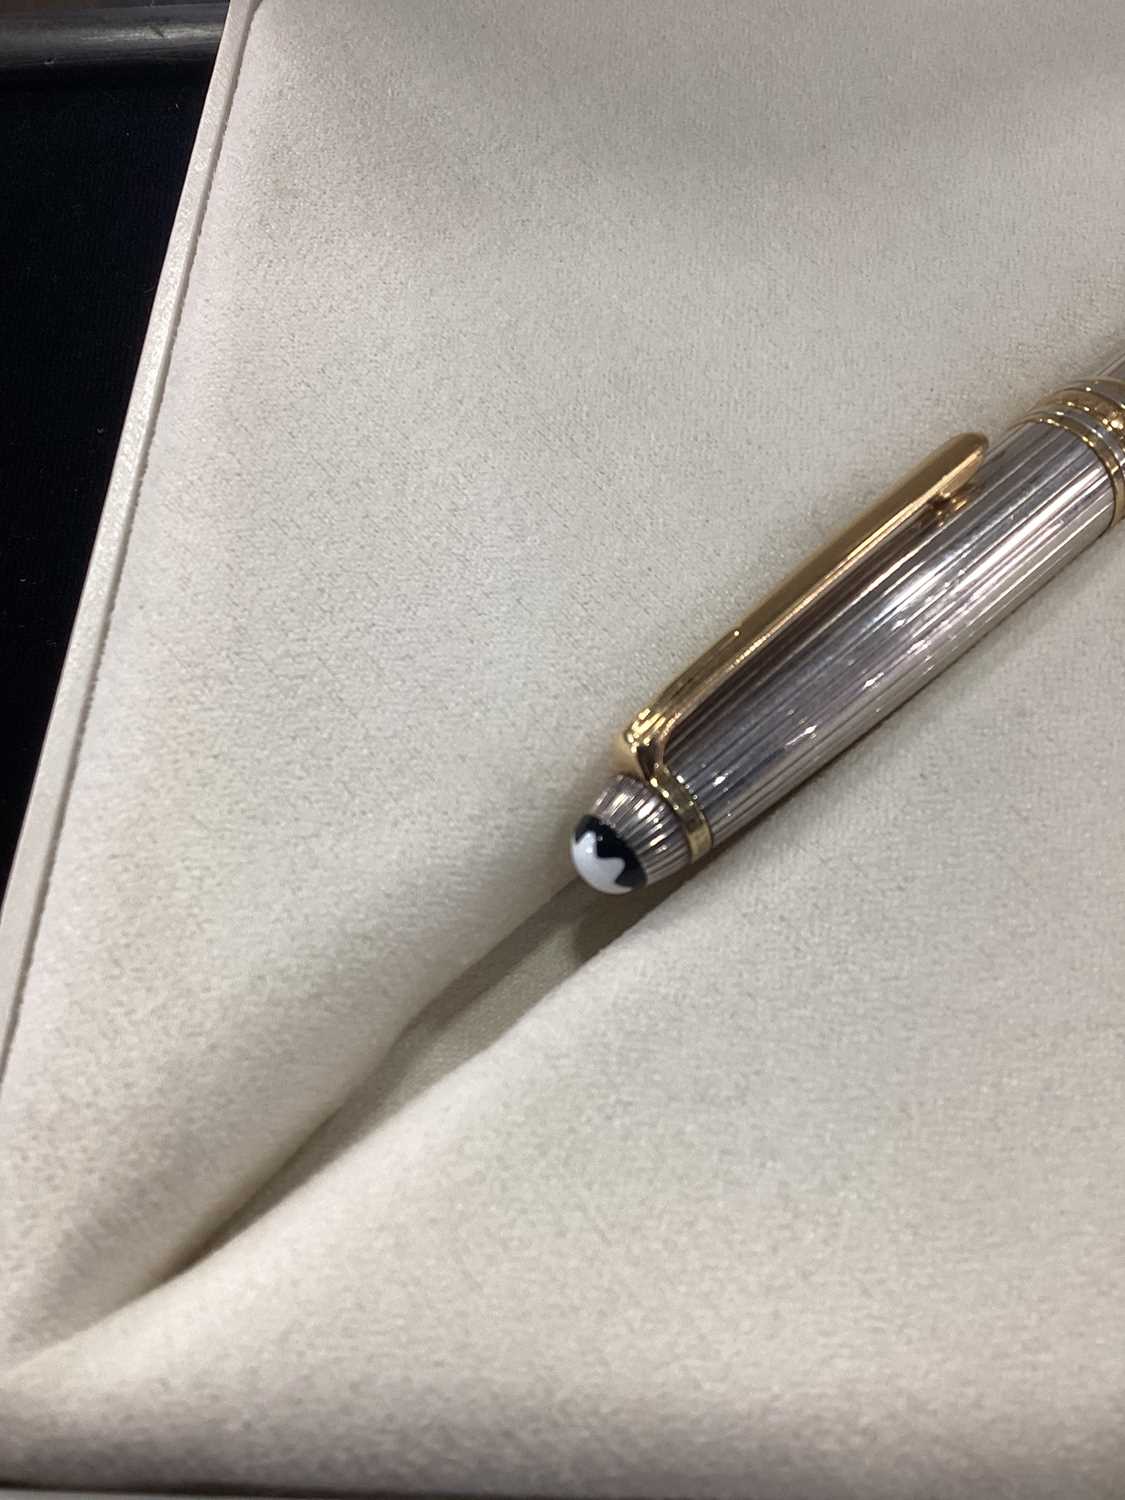 MONT BLANC, SILVER MEISTERSTUCK FOUNTAIN PEN - Image 4 of 8